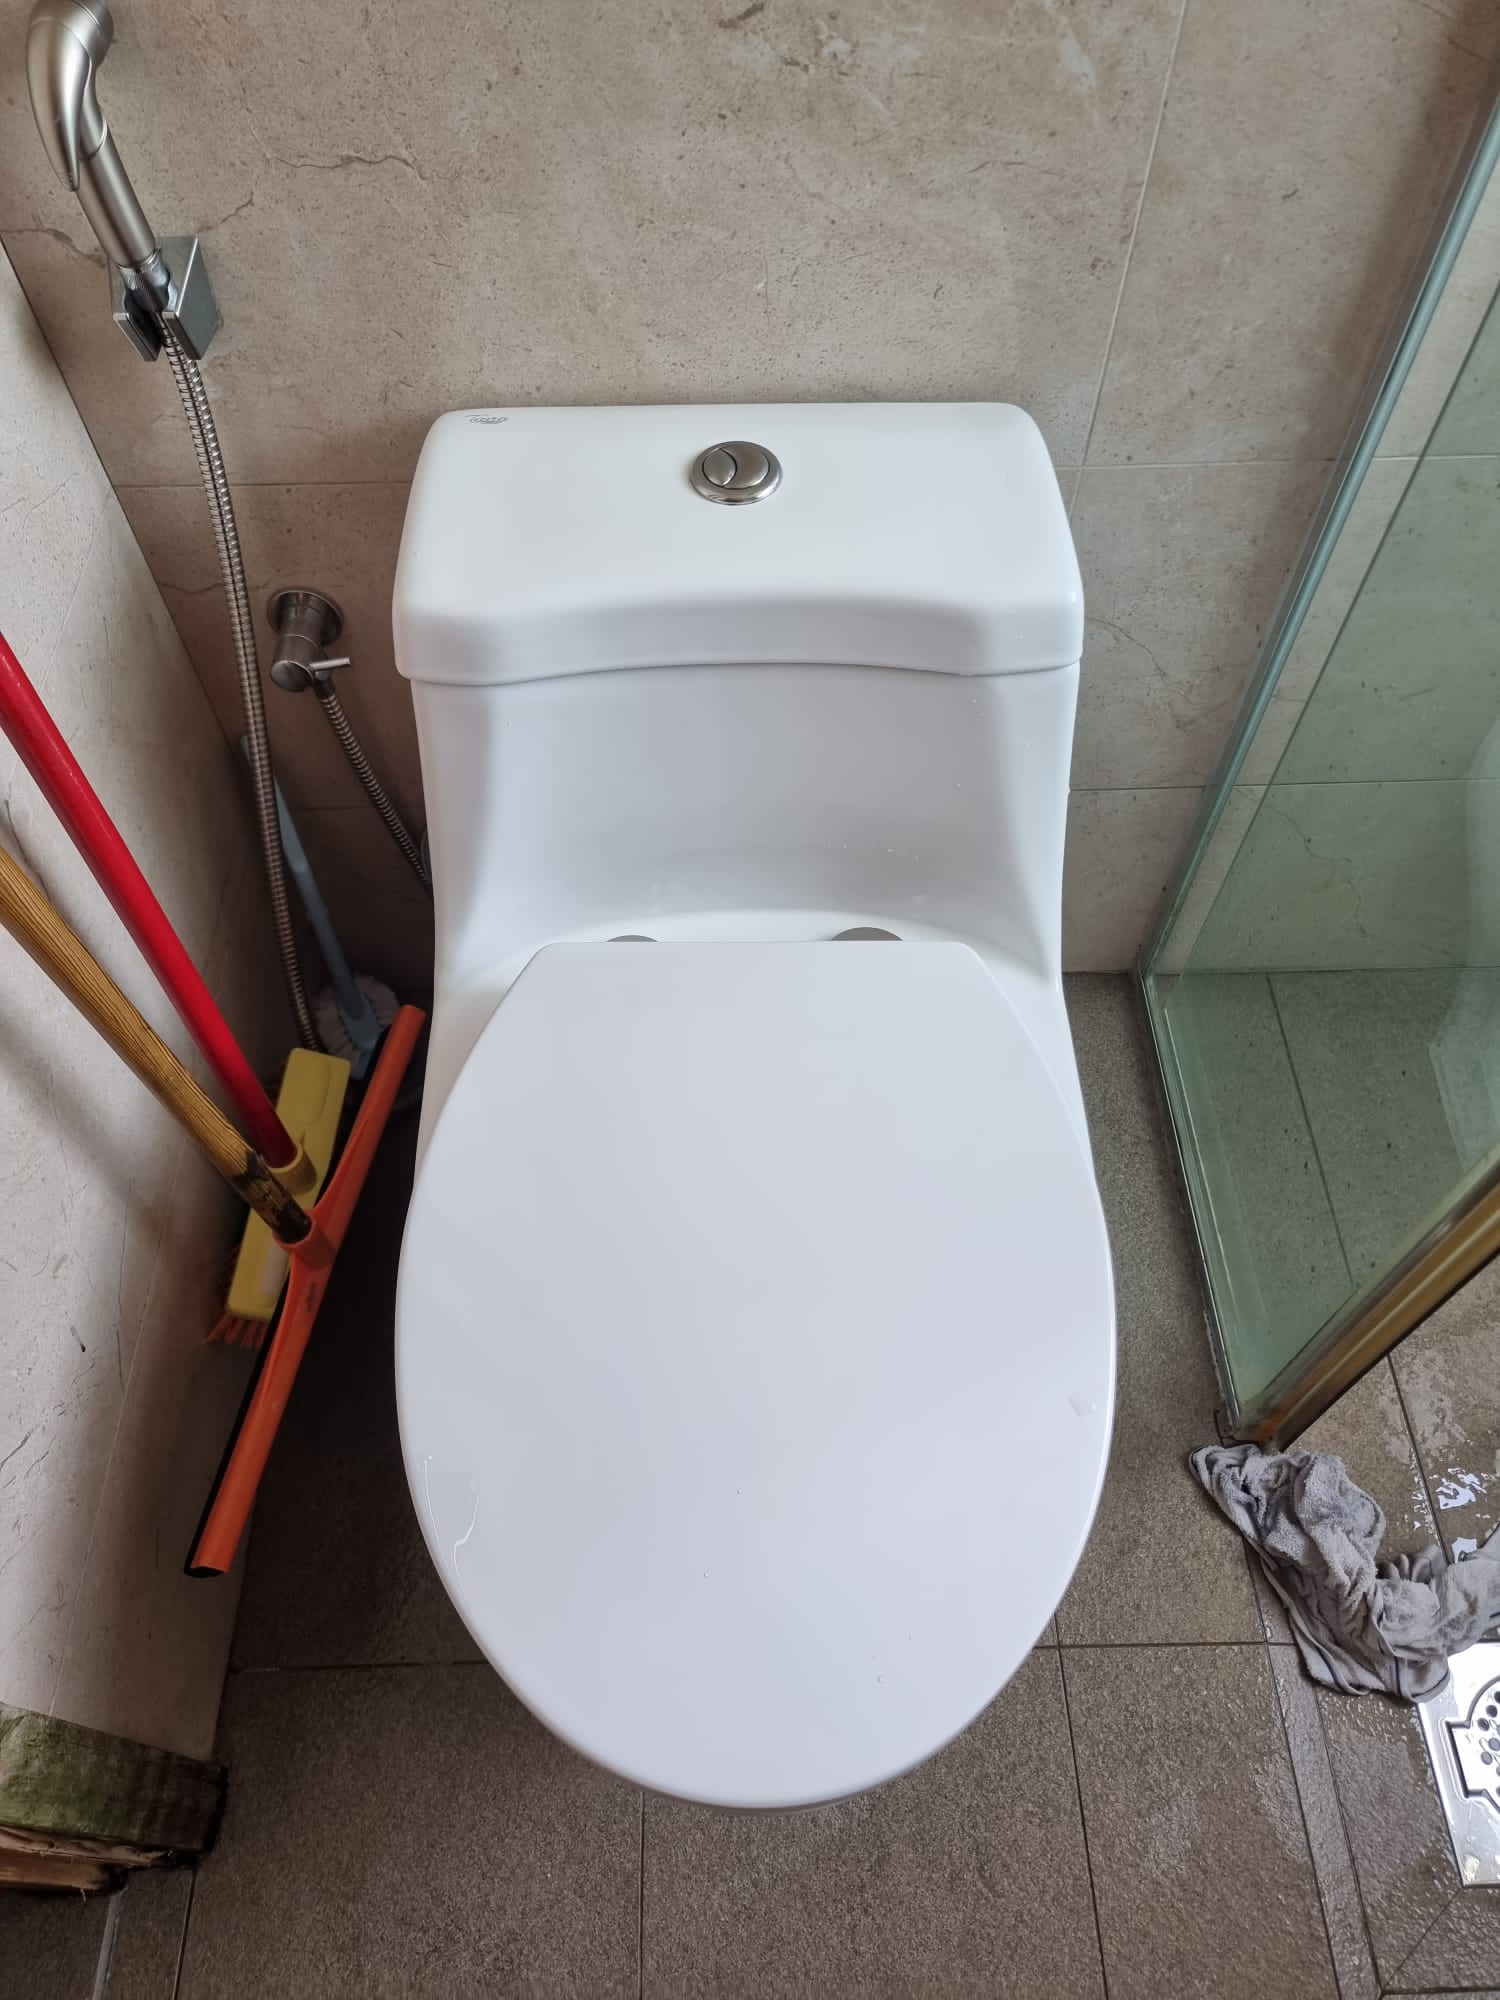 Supply And Replace New Toilet Bowl Cover 1